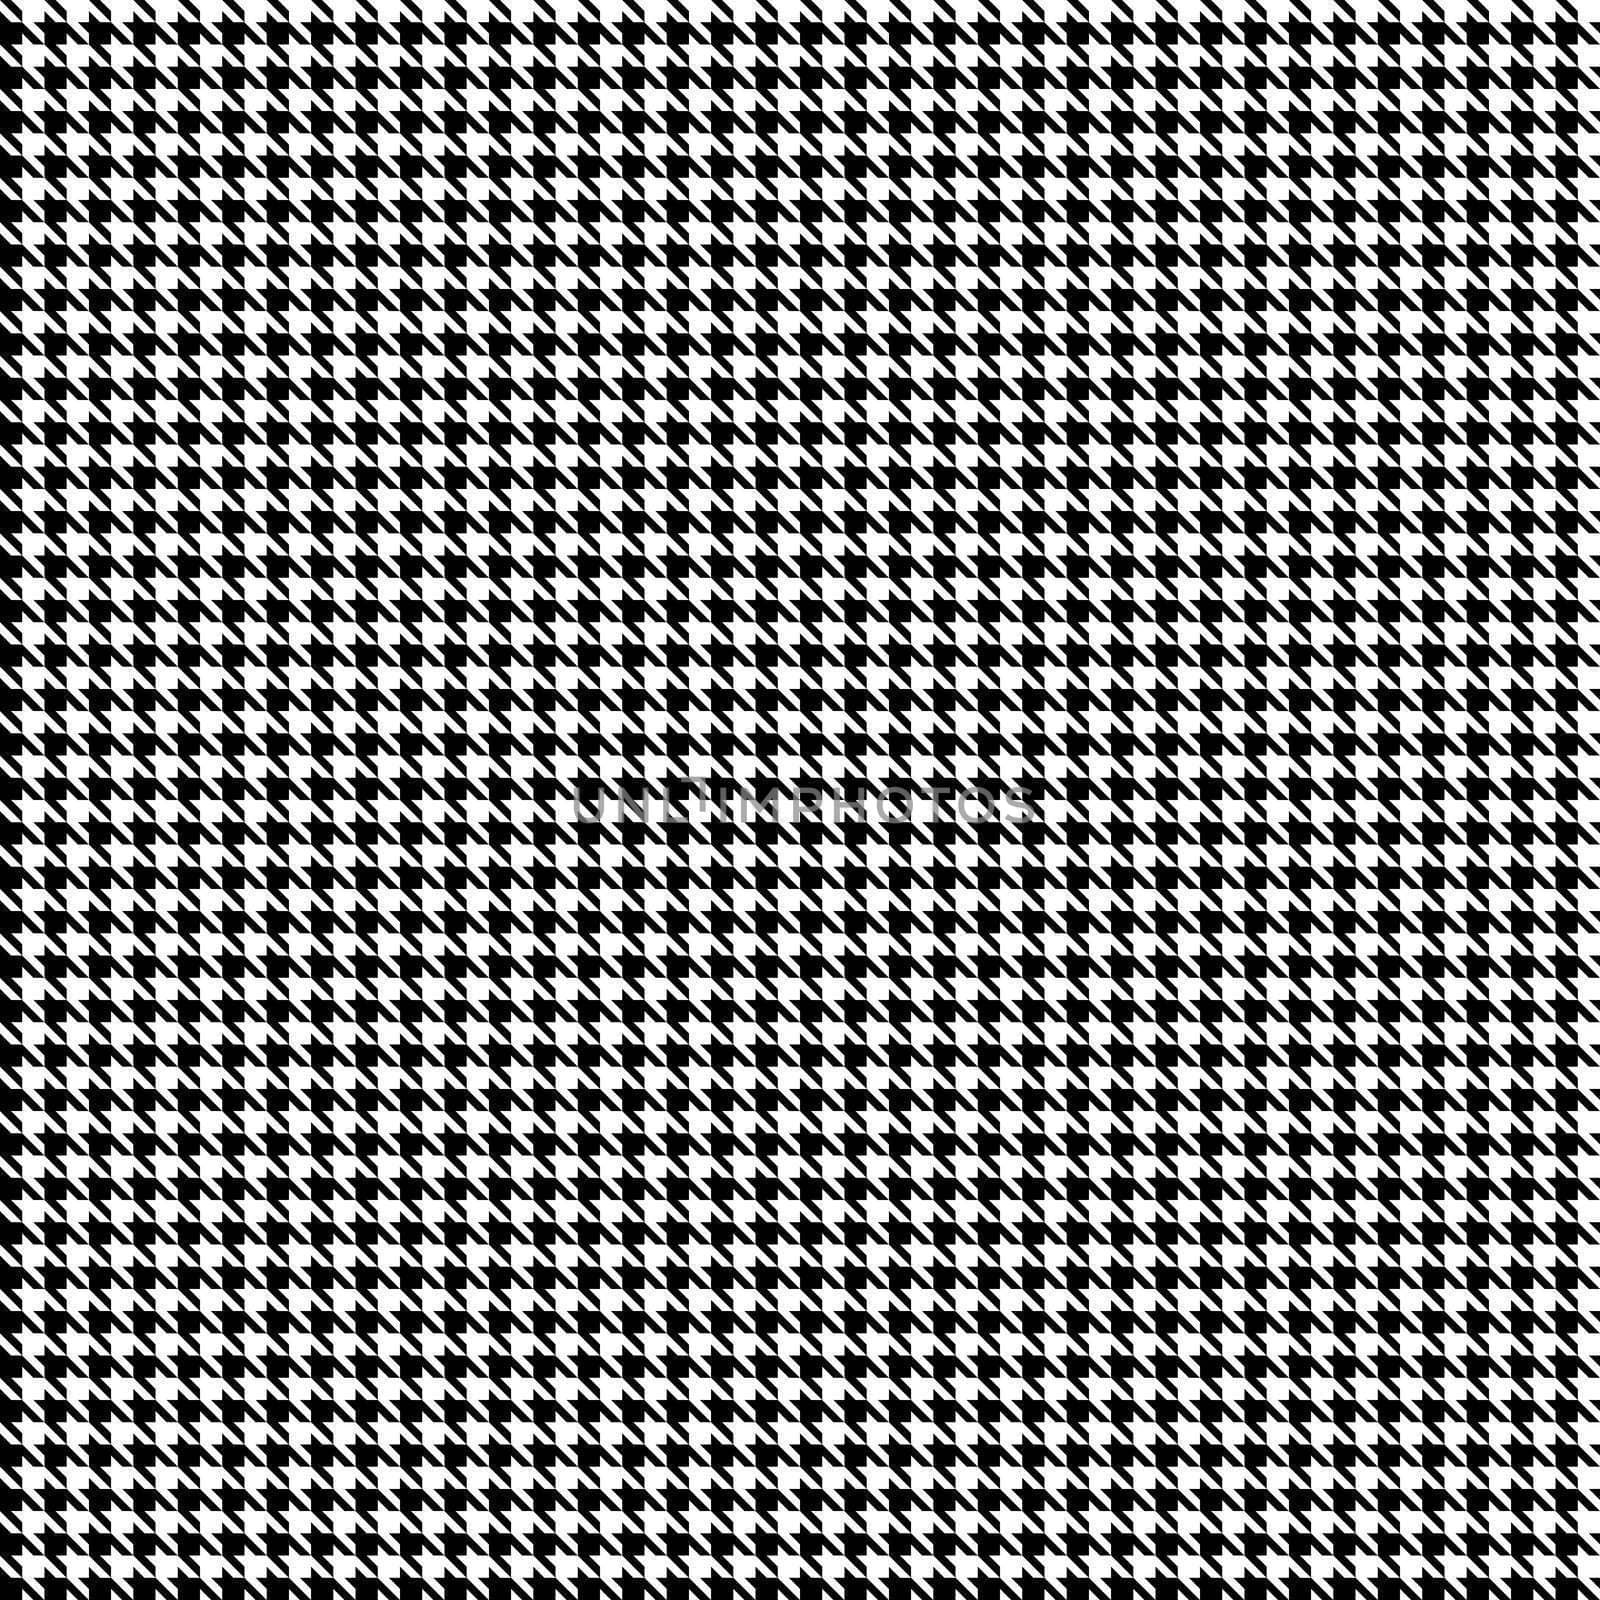 Tight Houndstooth Pattern by graficallyminded